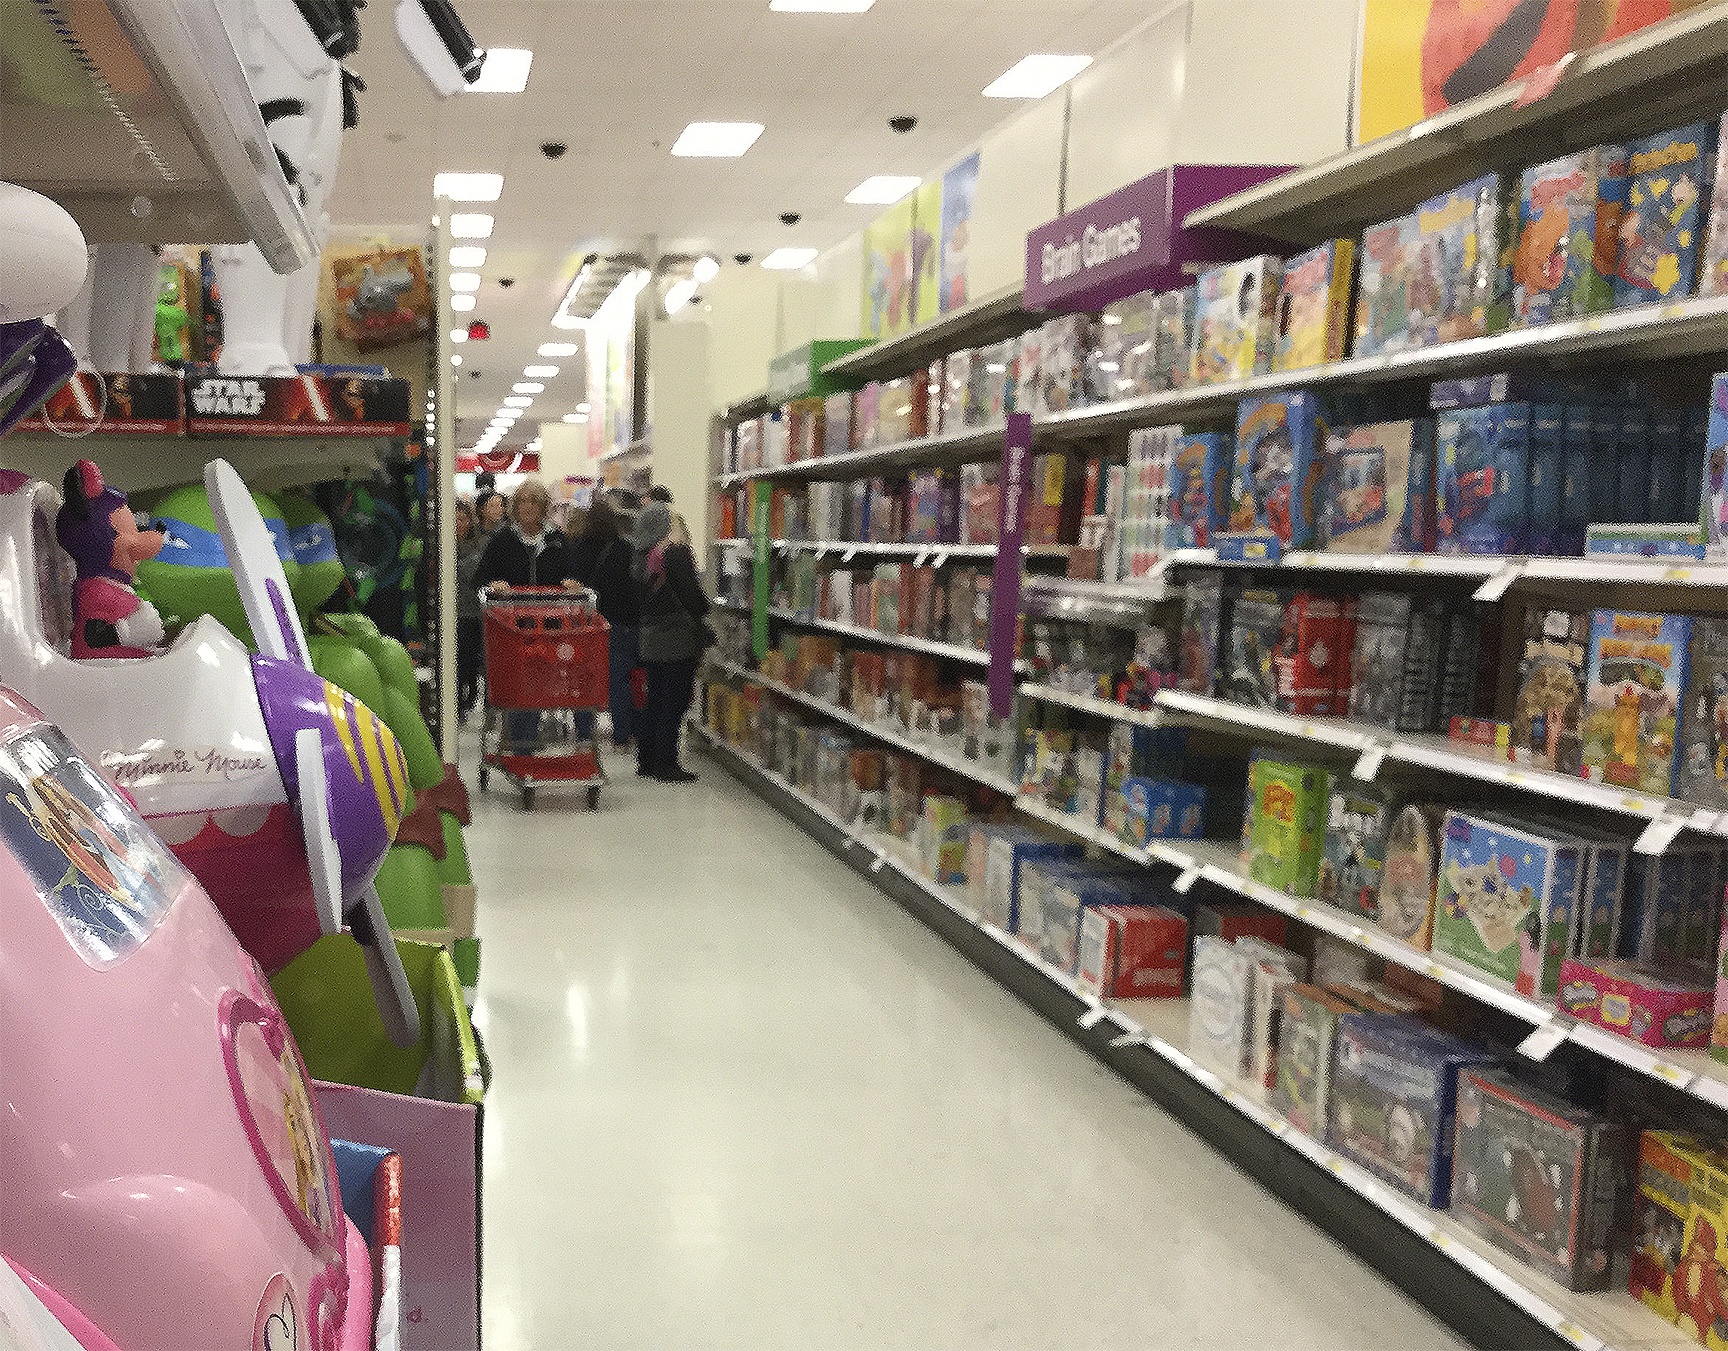 Black Friday crowds thinner; what will Shop Small Saturday bring?